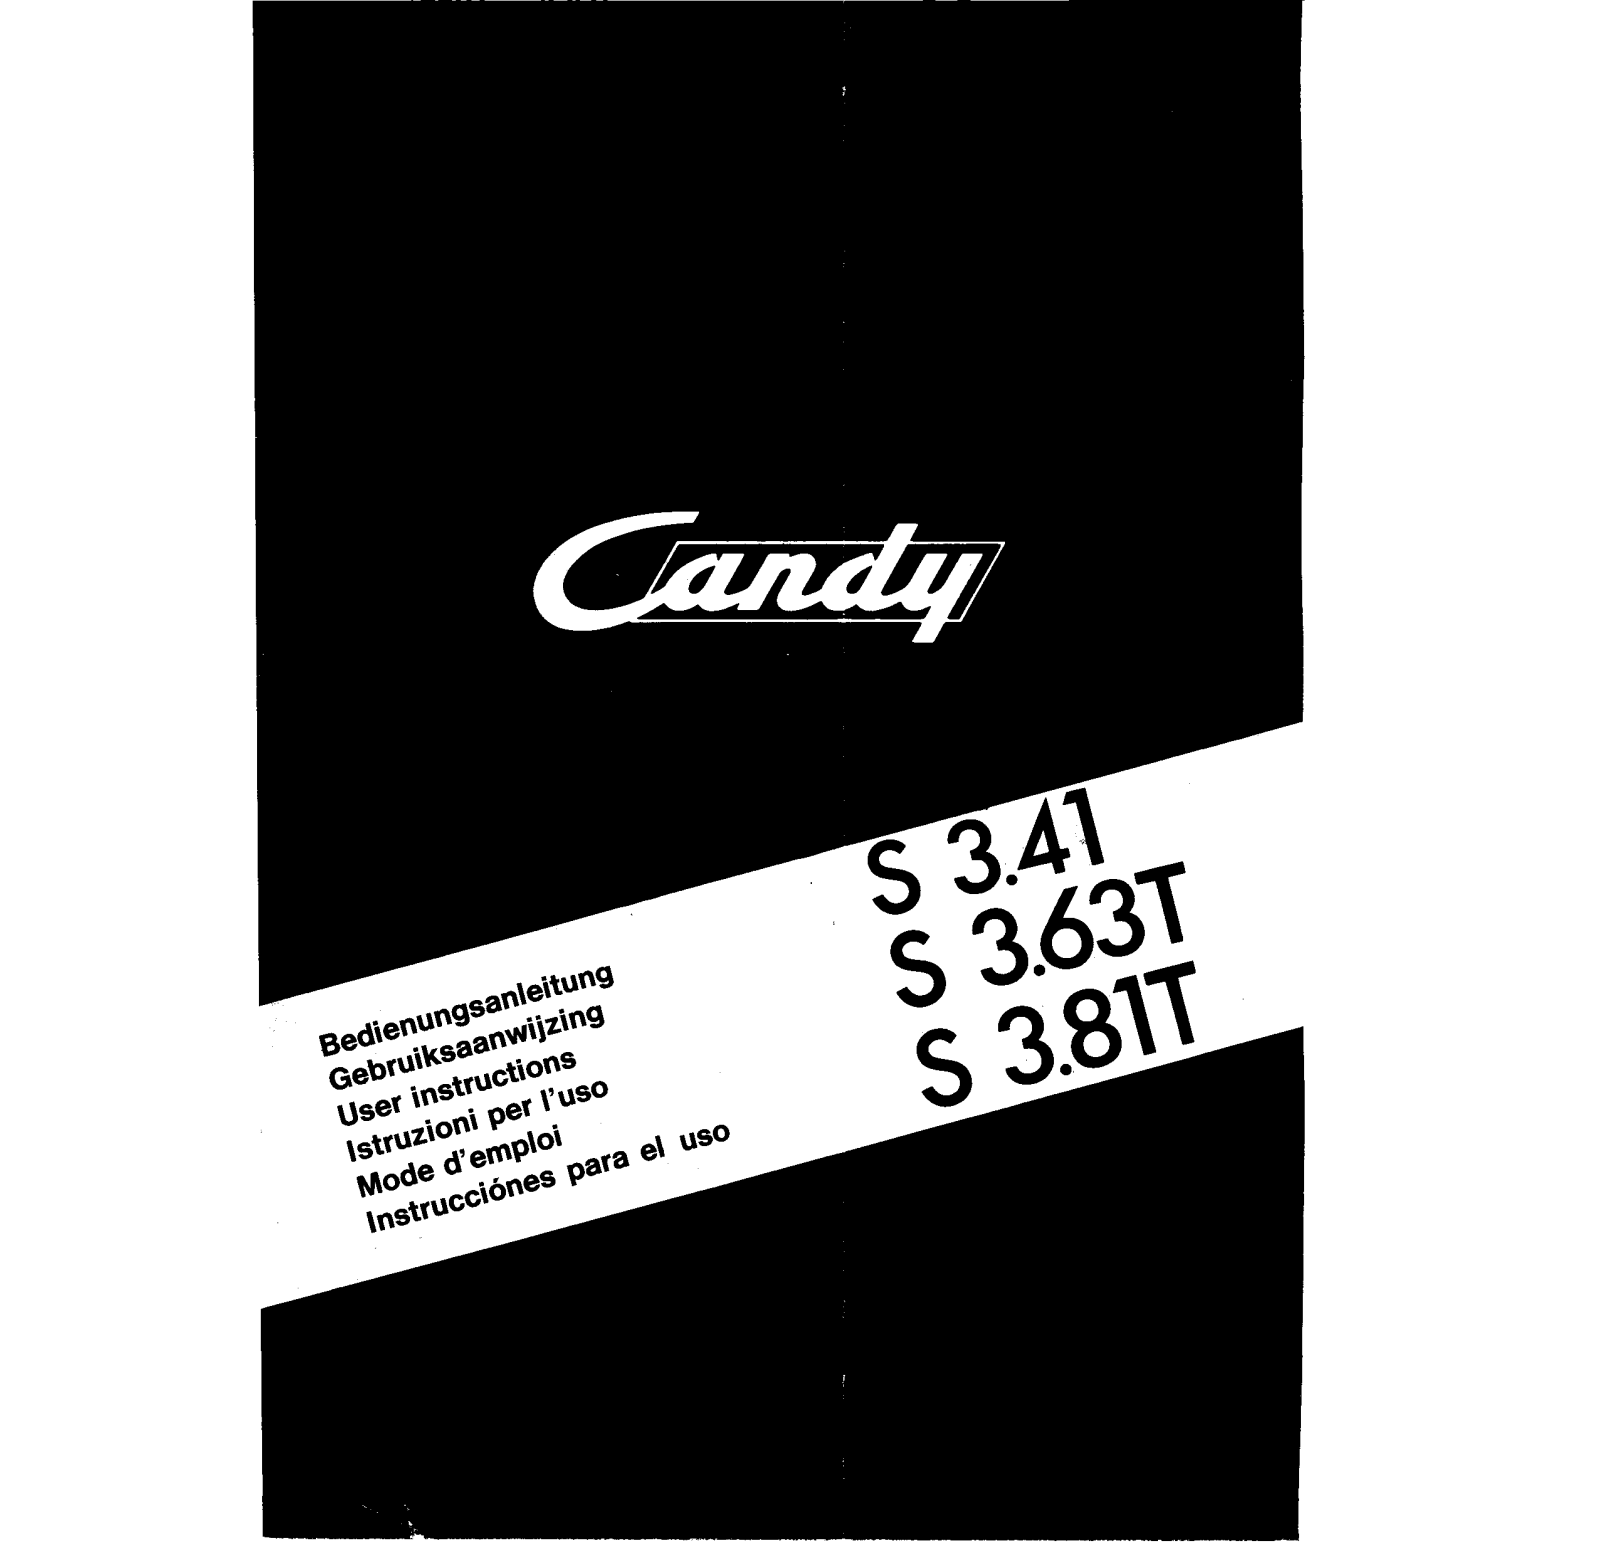 Candy S 341 X, S 381 TX, S 3, 63 X User Manual